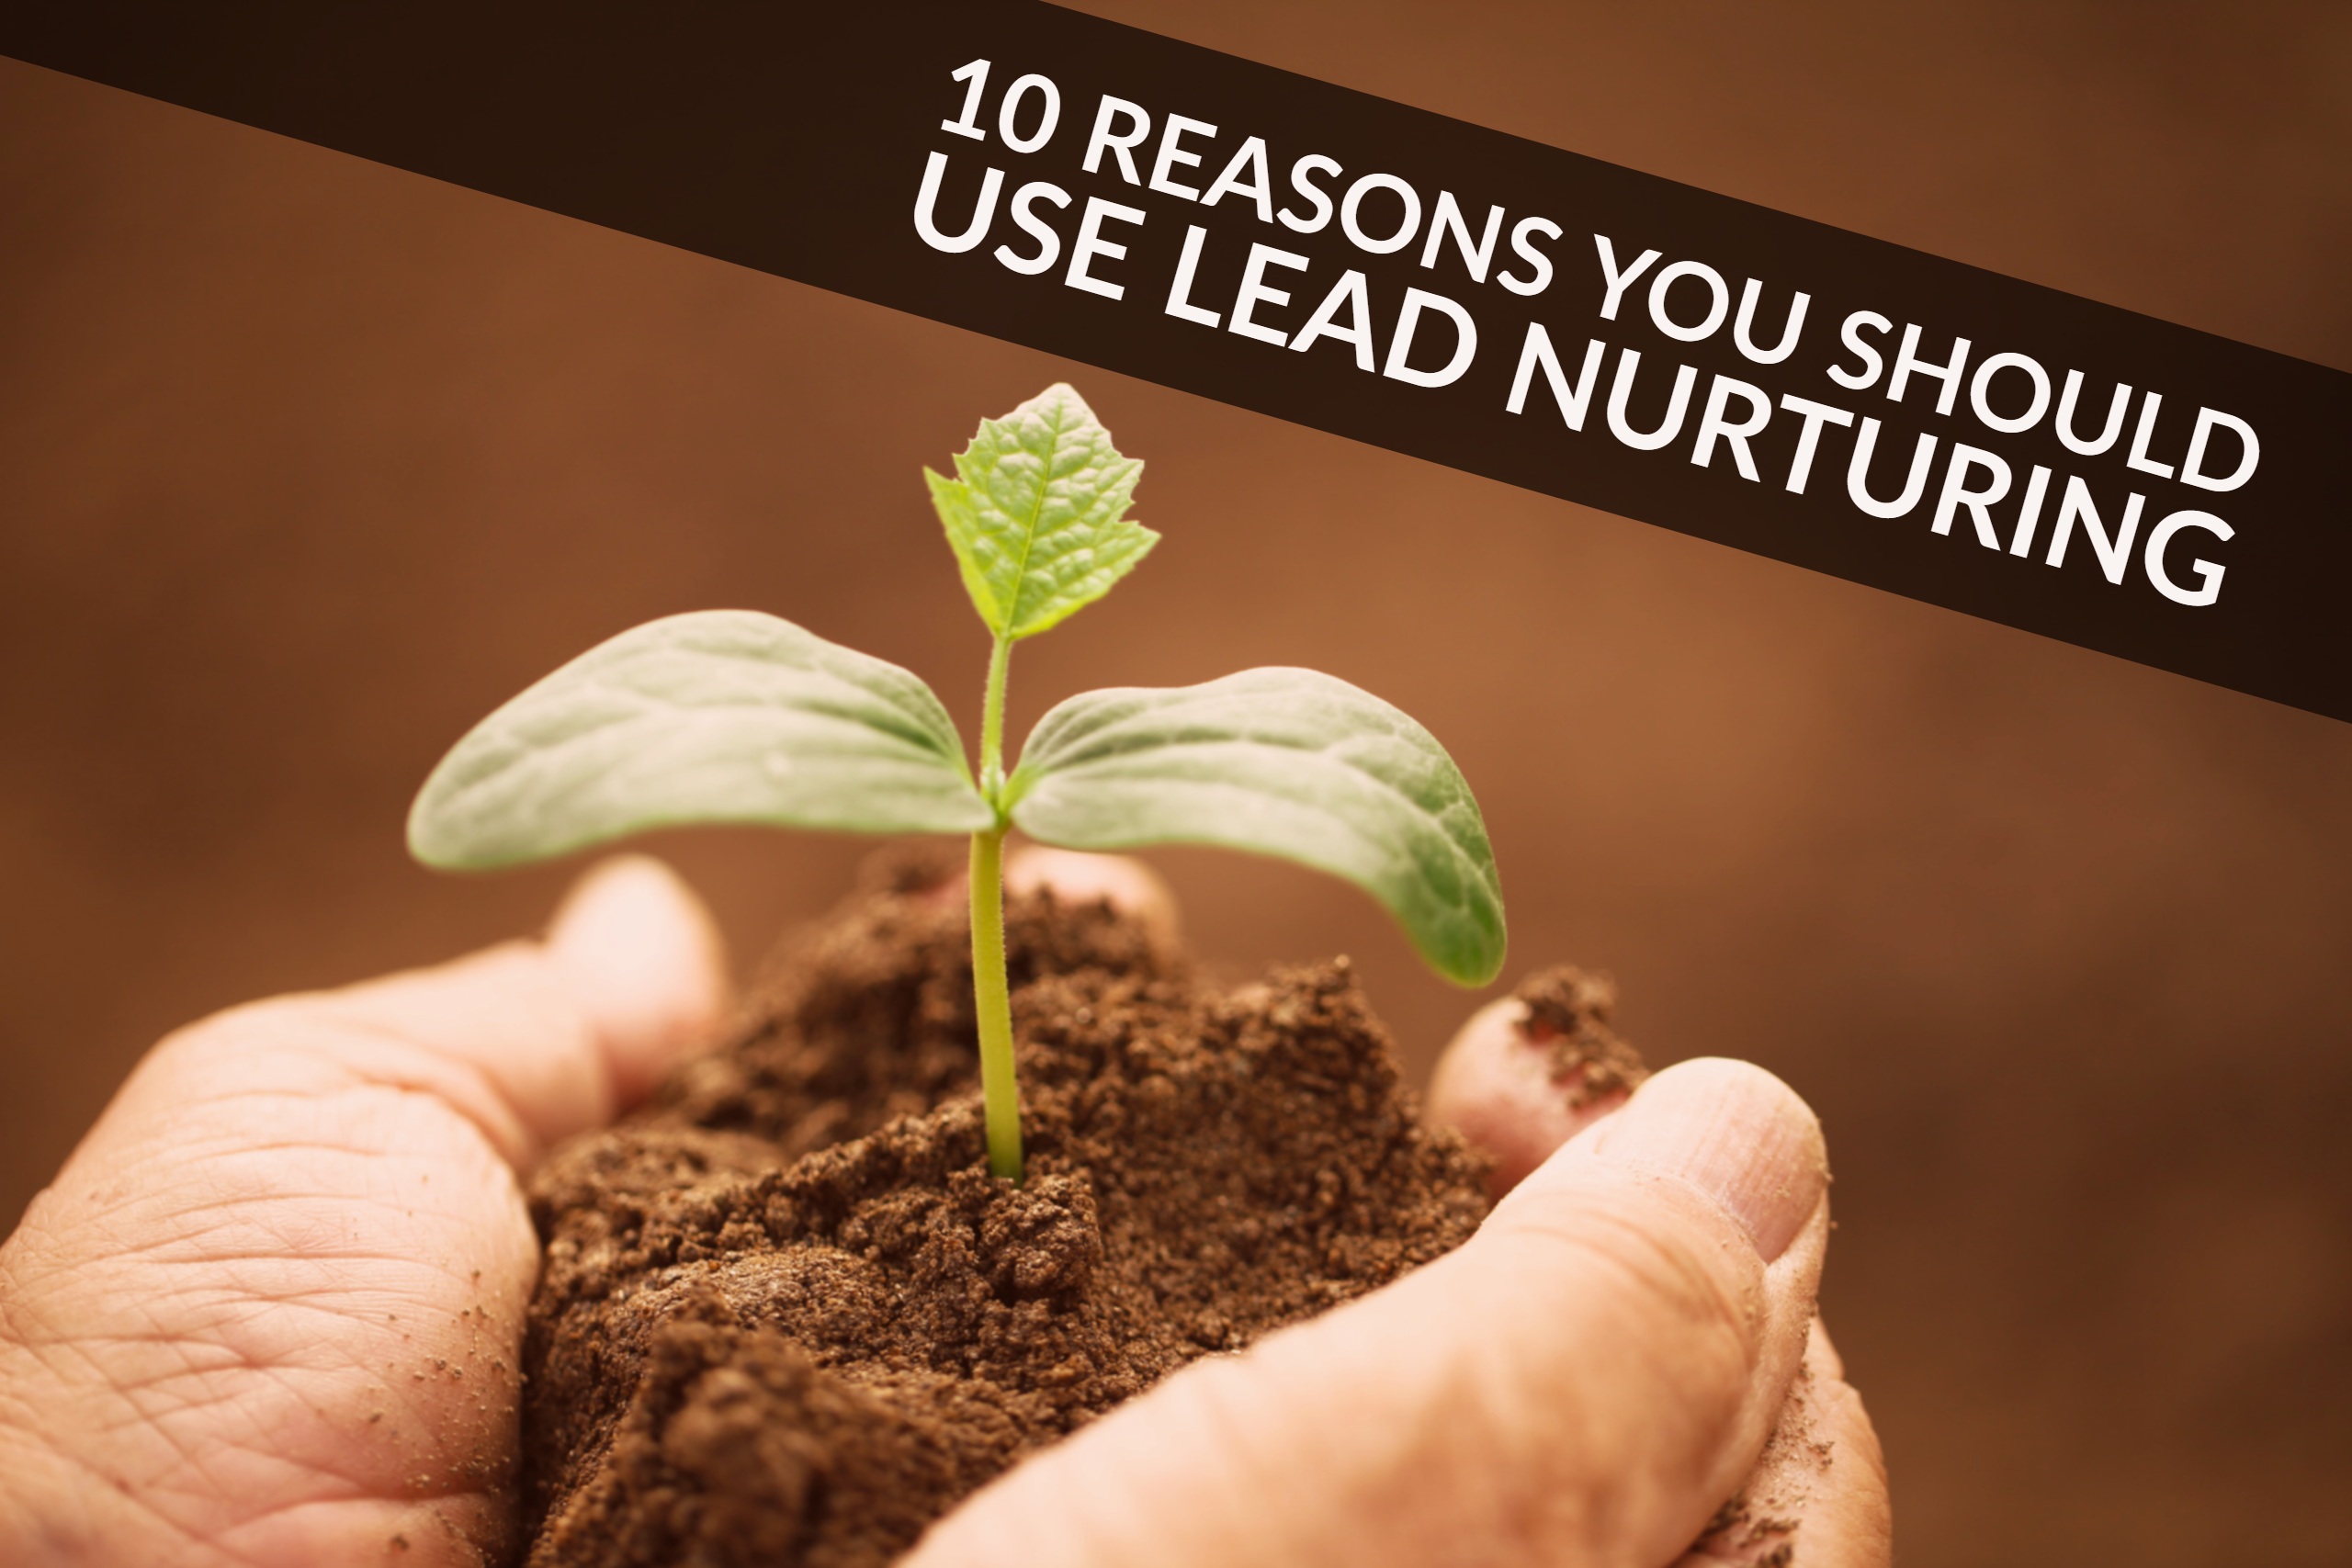 10 Reasons You Should Use Lead Nurturing [infographic]